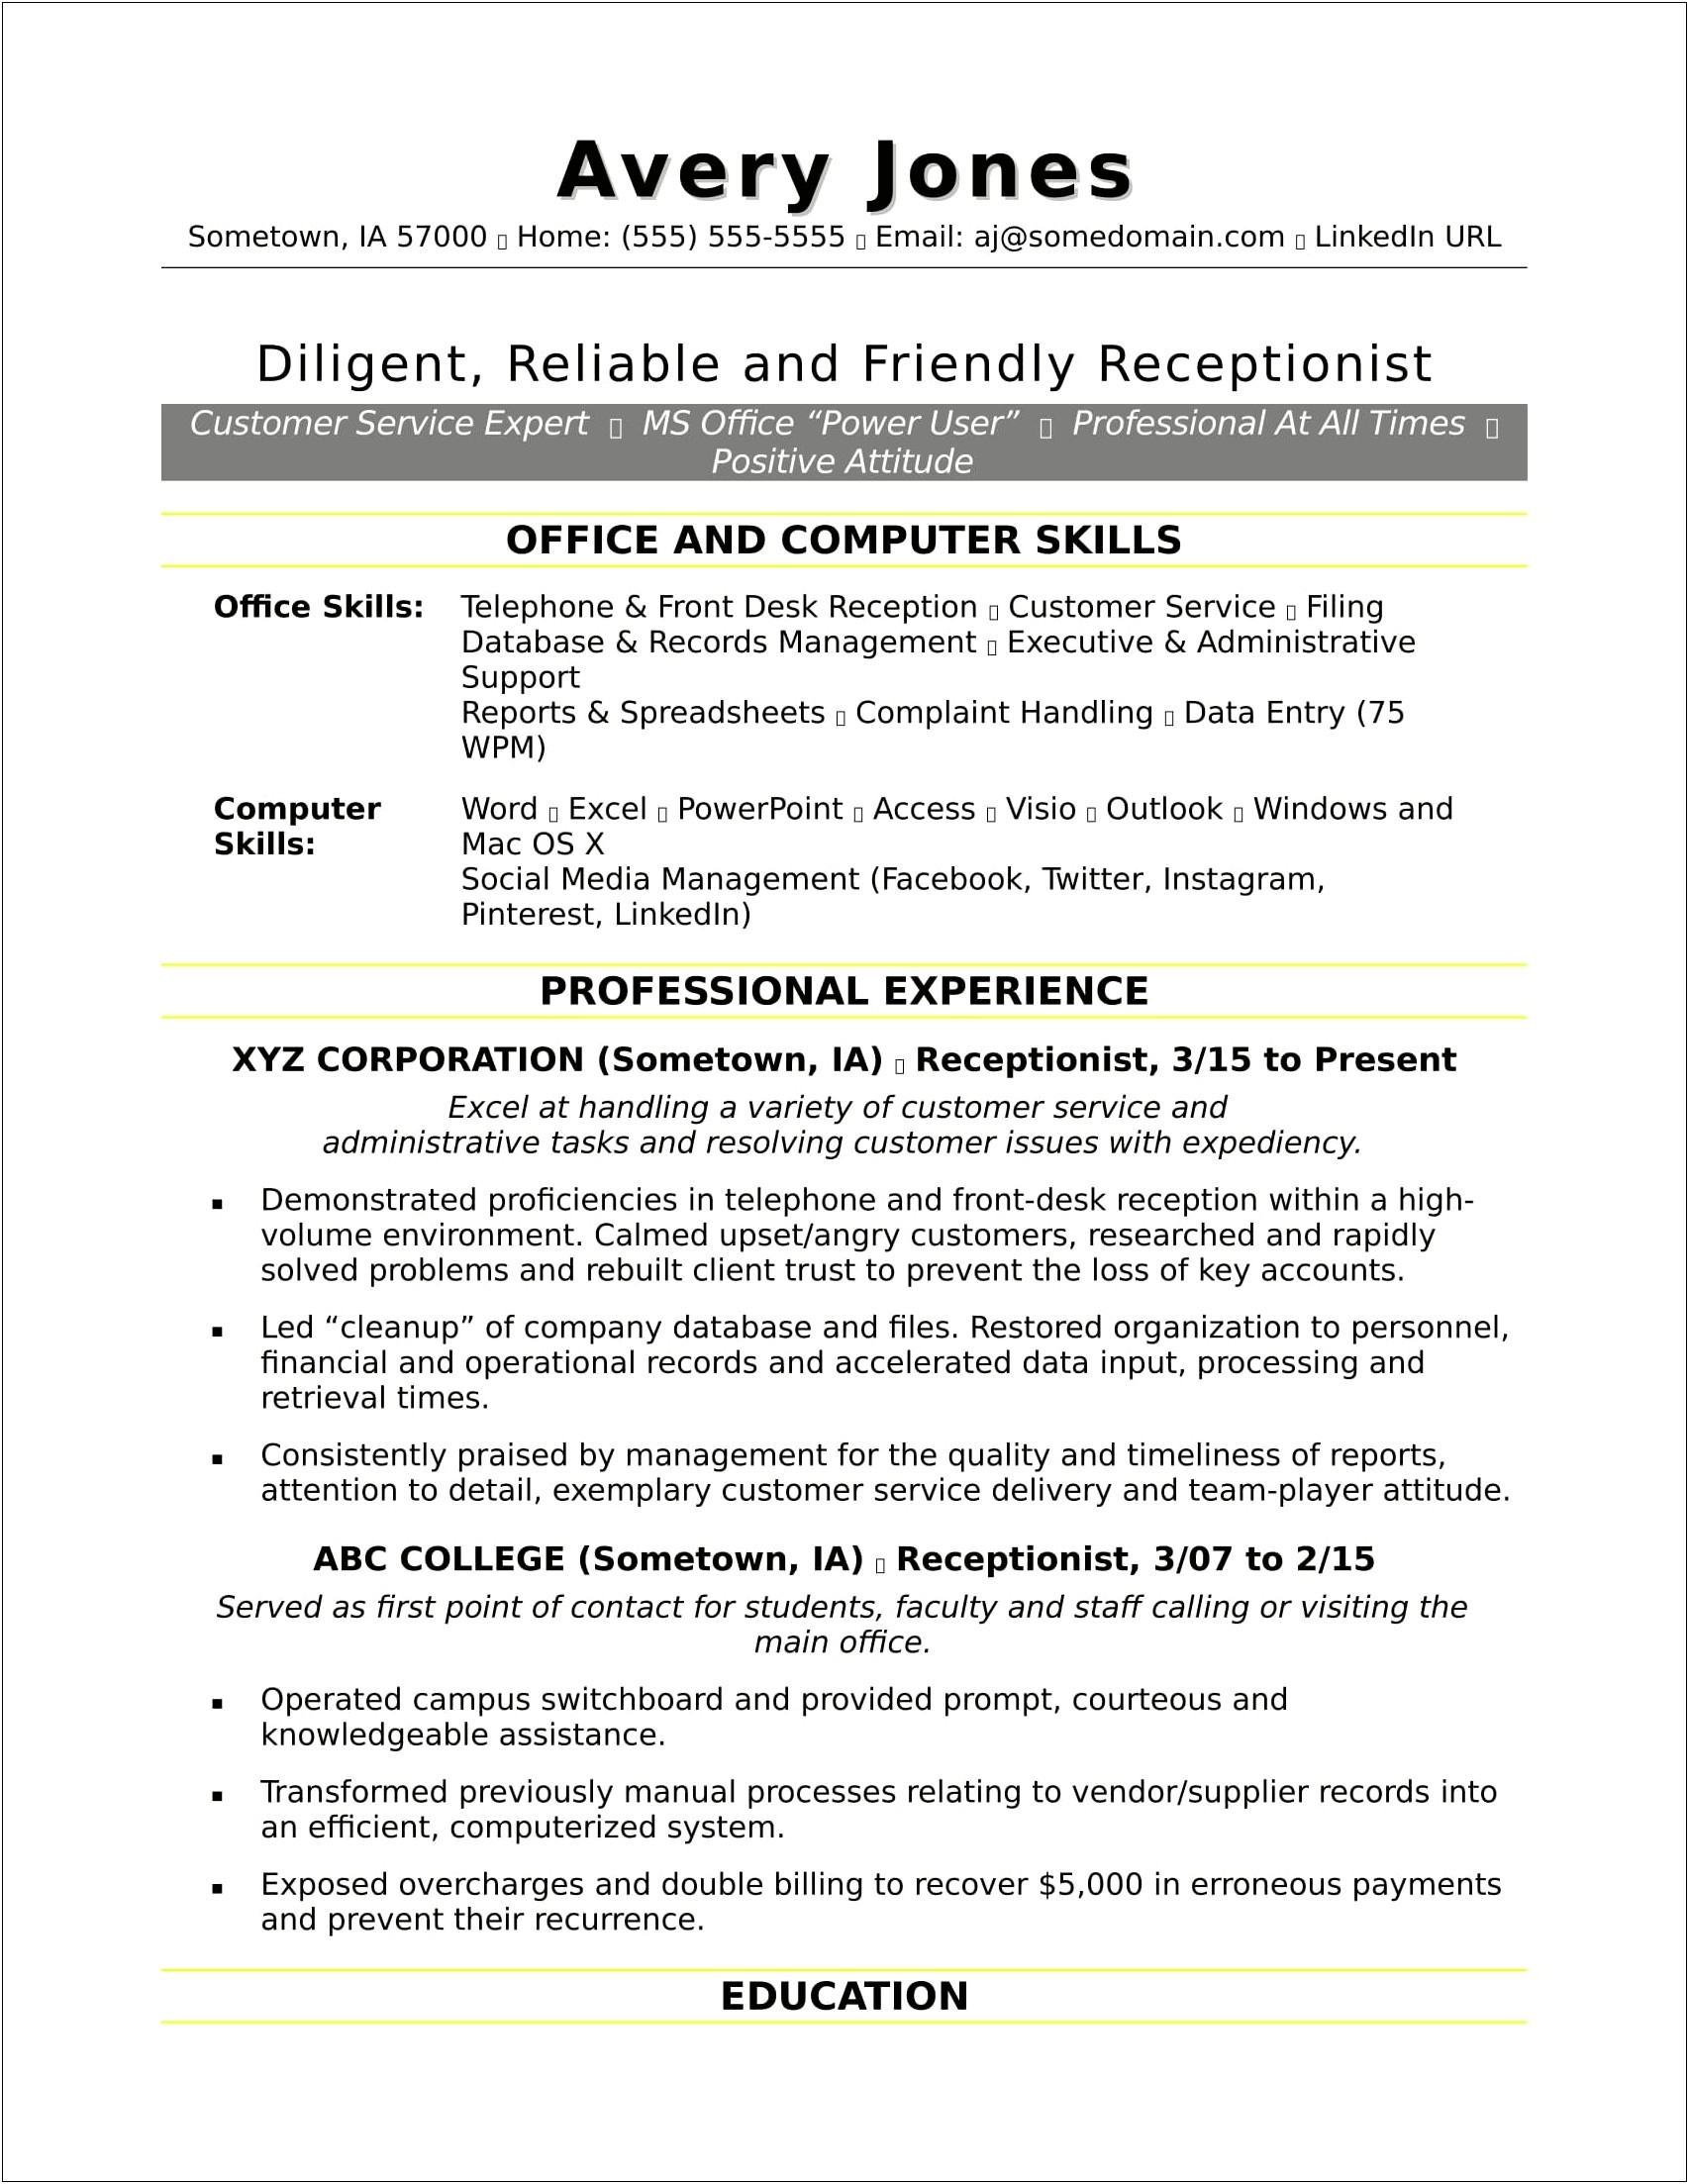 Resume Objective Examples For Receptionist Position